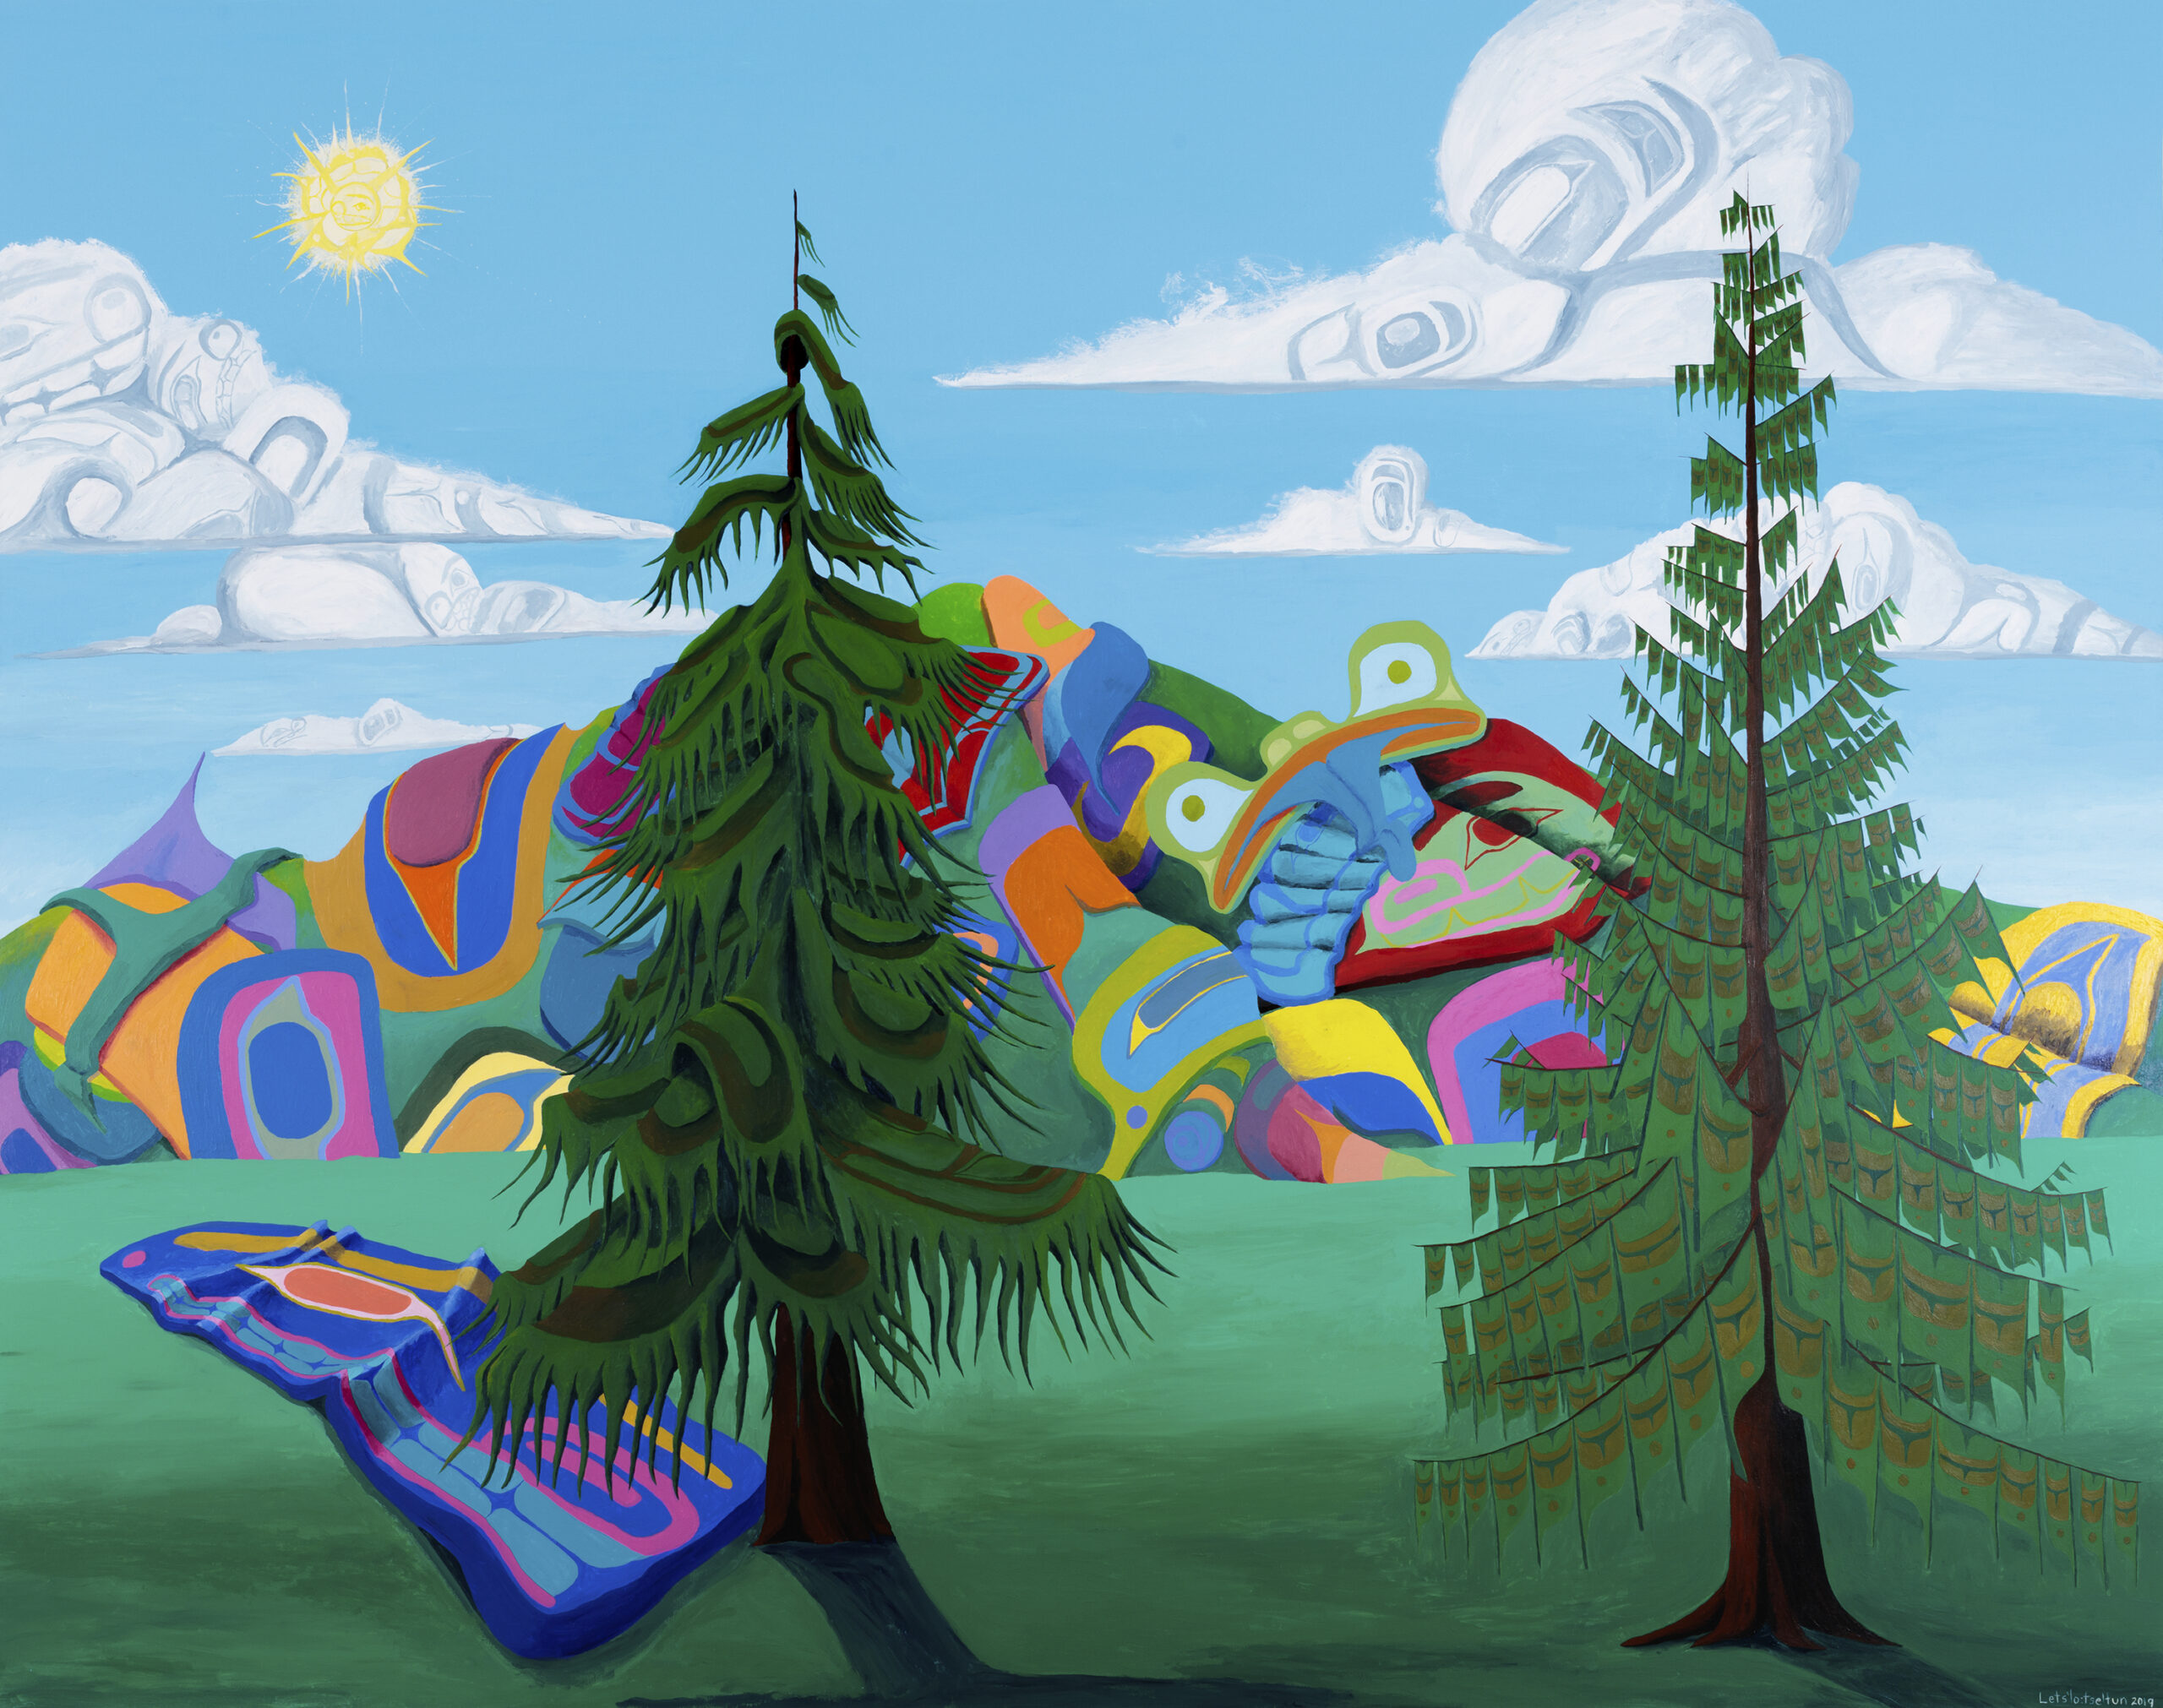 Lawrence Paul Yuxweluptun (b. 1957), New Climate Landscape (Northwest Coast Climate Change), 2019, Acrylic on canvas, McMichael Canadian Art Collection, purchase BMO Financial Group, 2020.10, Image courtesy of Sarah Macaulay